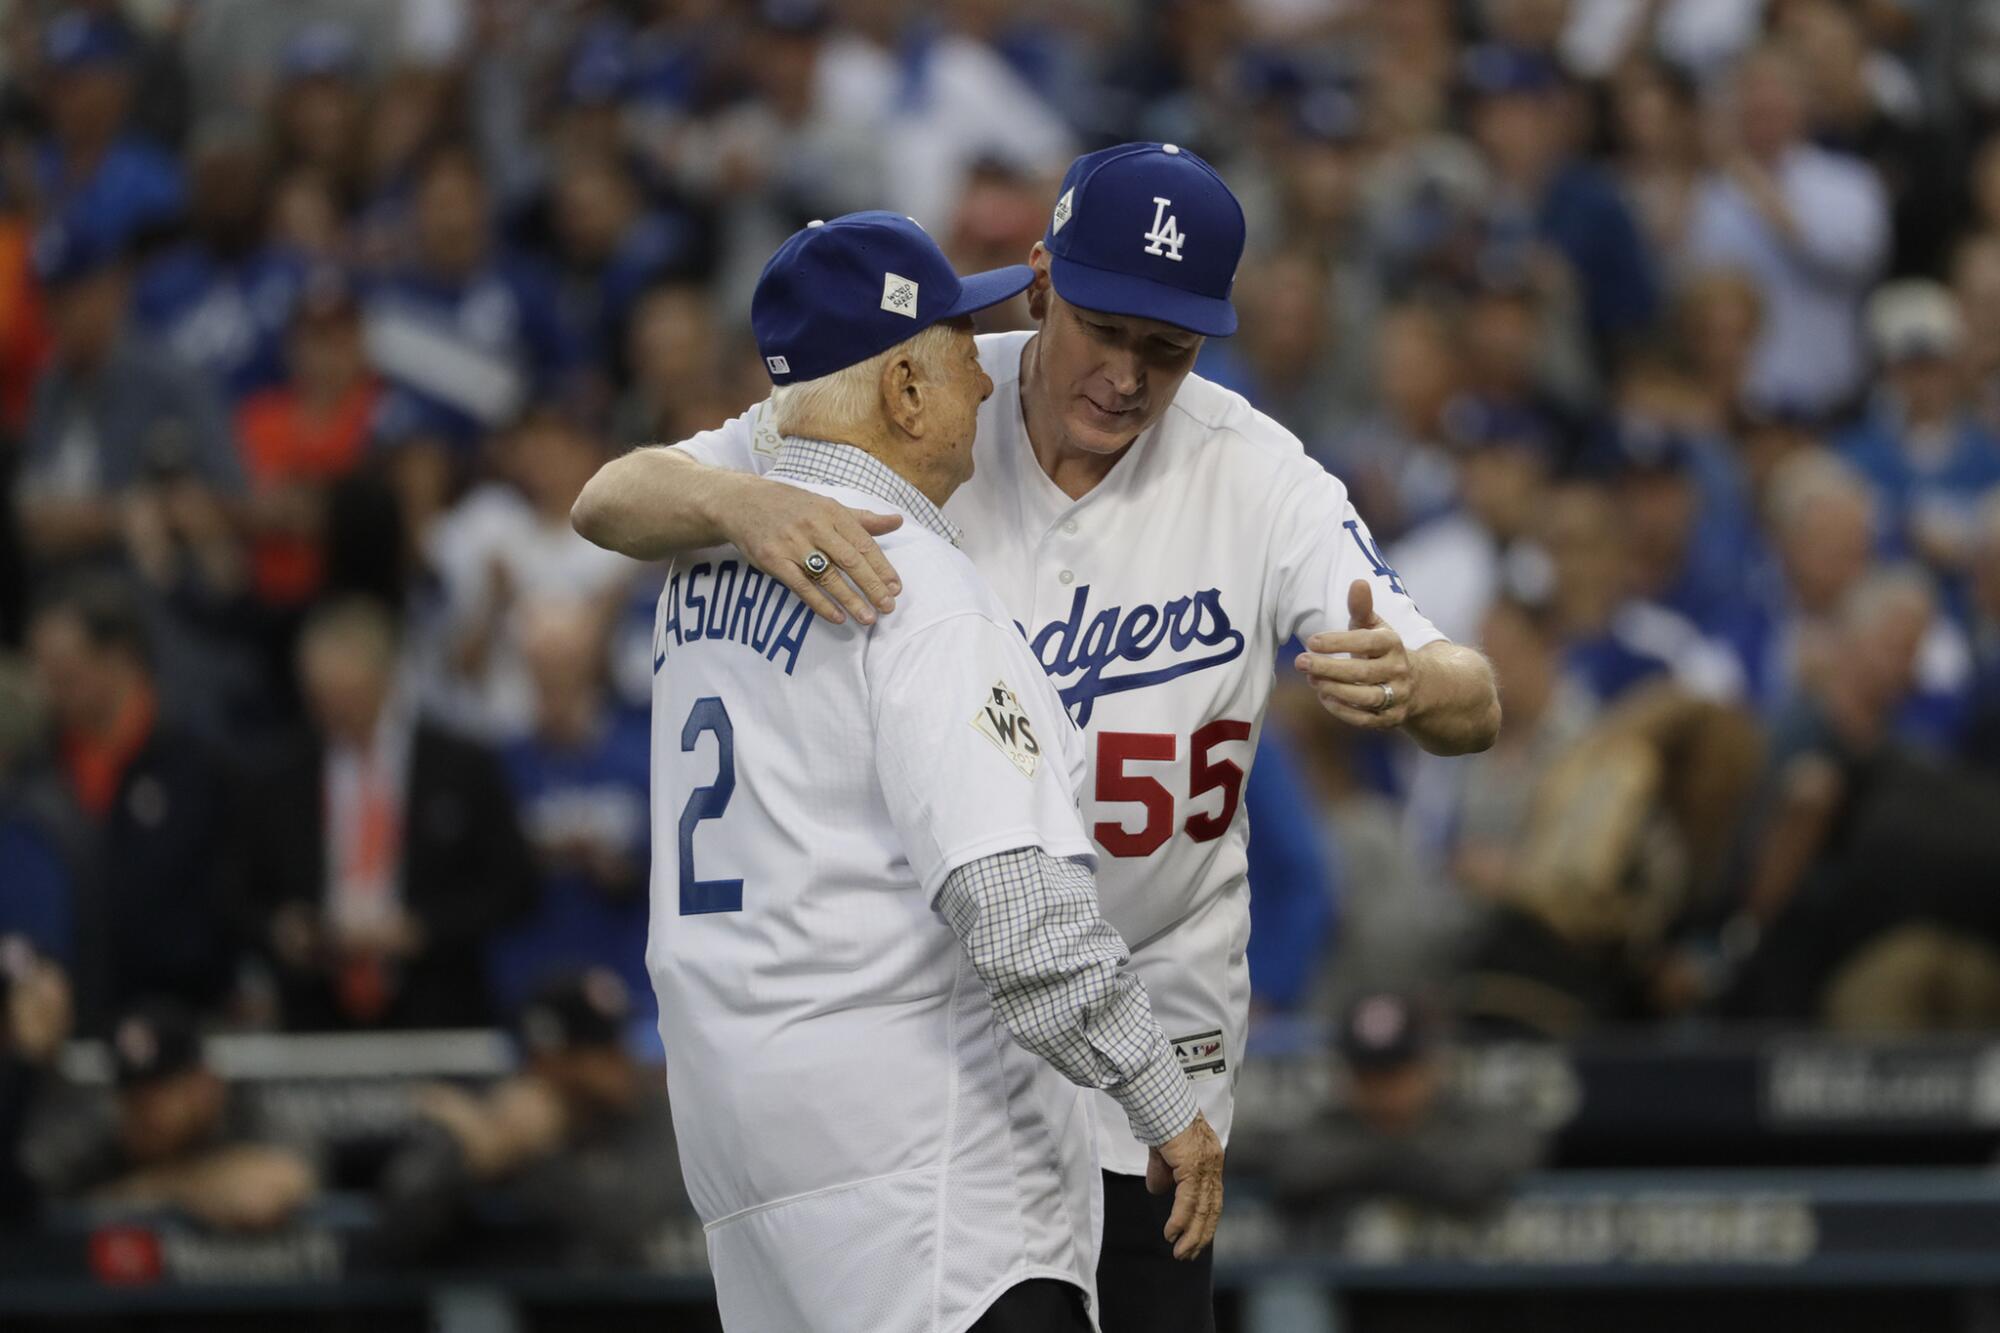 Tommy Lasorda and Orel Hershiser hug after each threw out a ceremonial first pitch before Game 6 of the 2017 World Series